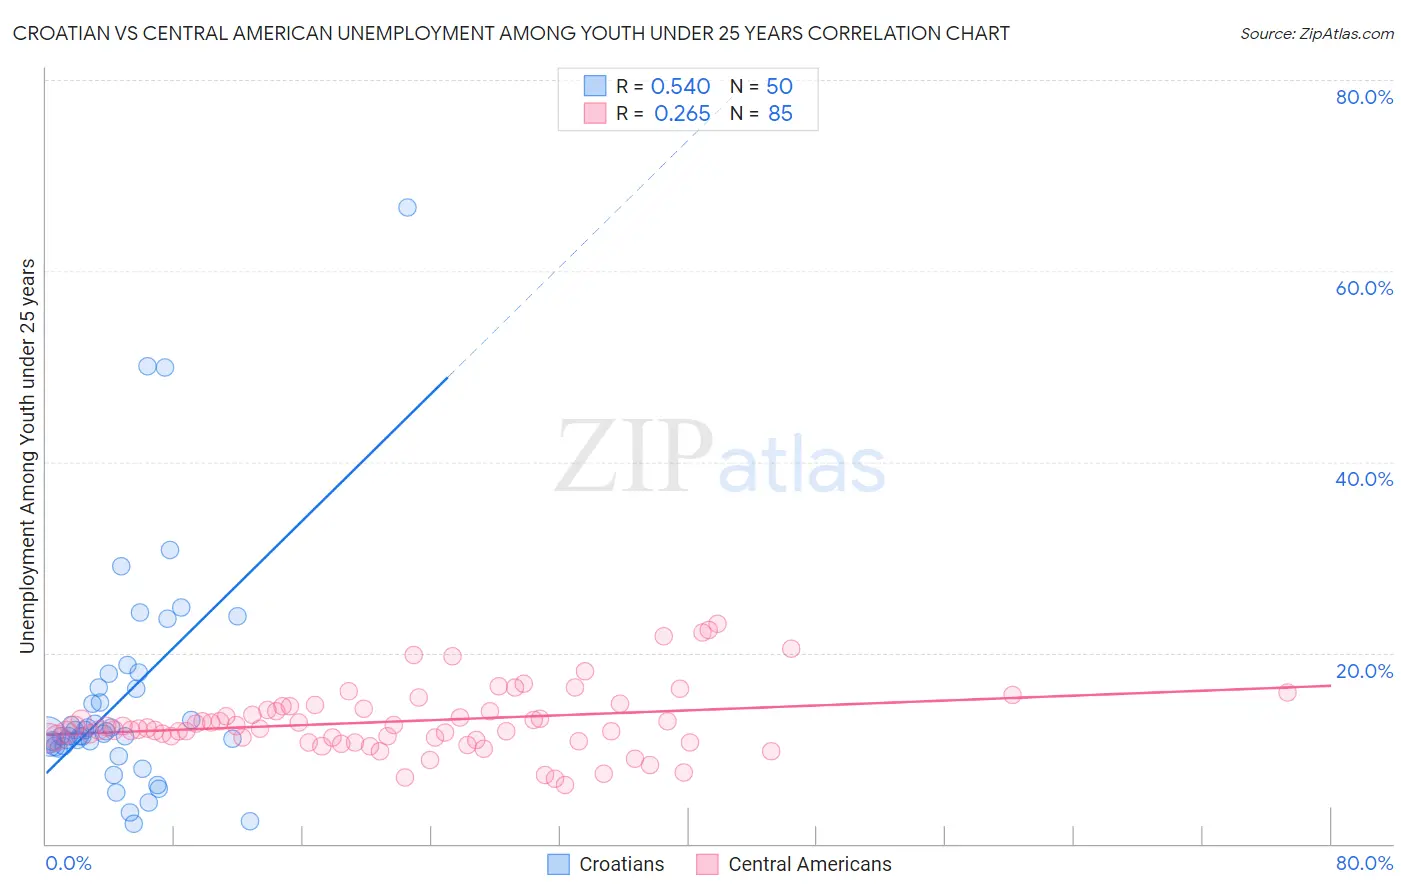 Croatian vs Central American Unemployment Among Youth under 25 years